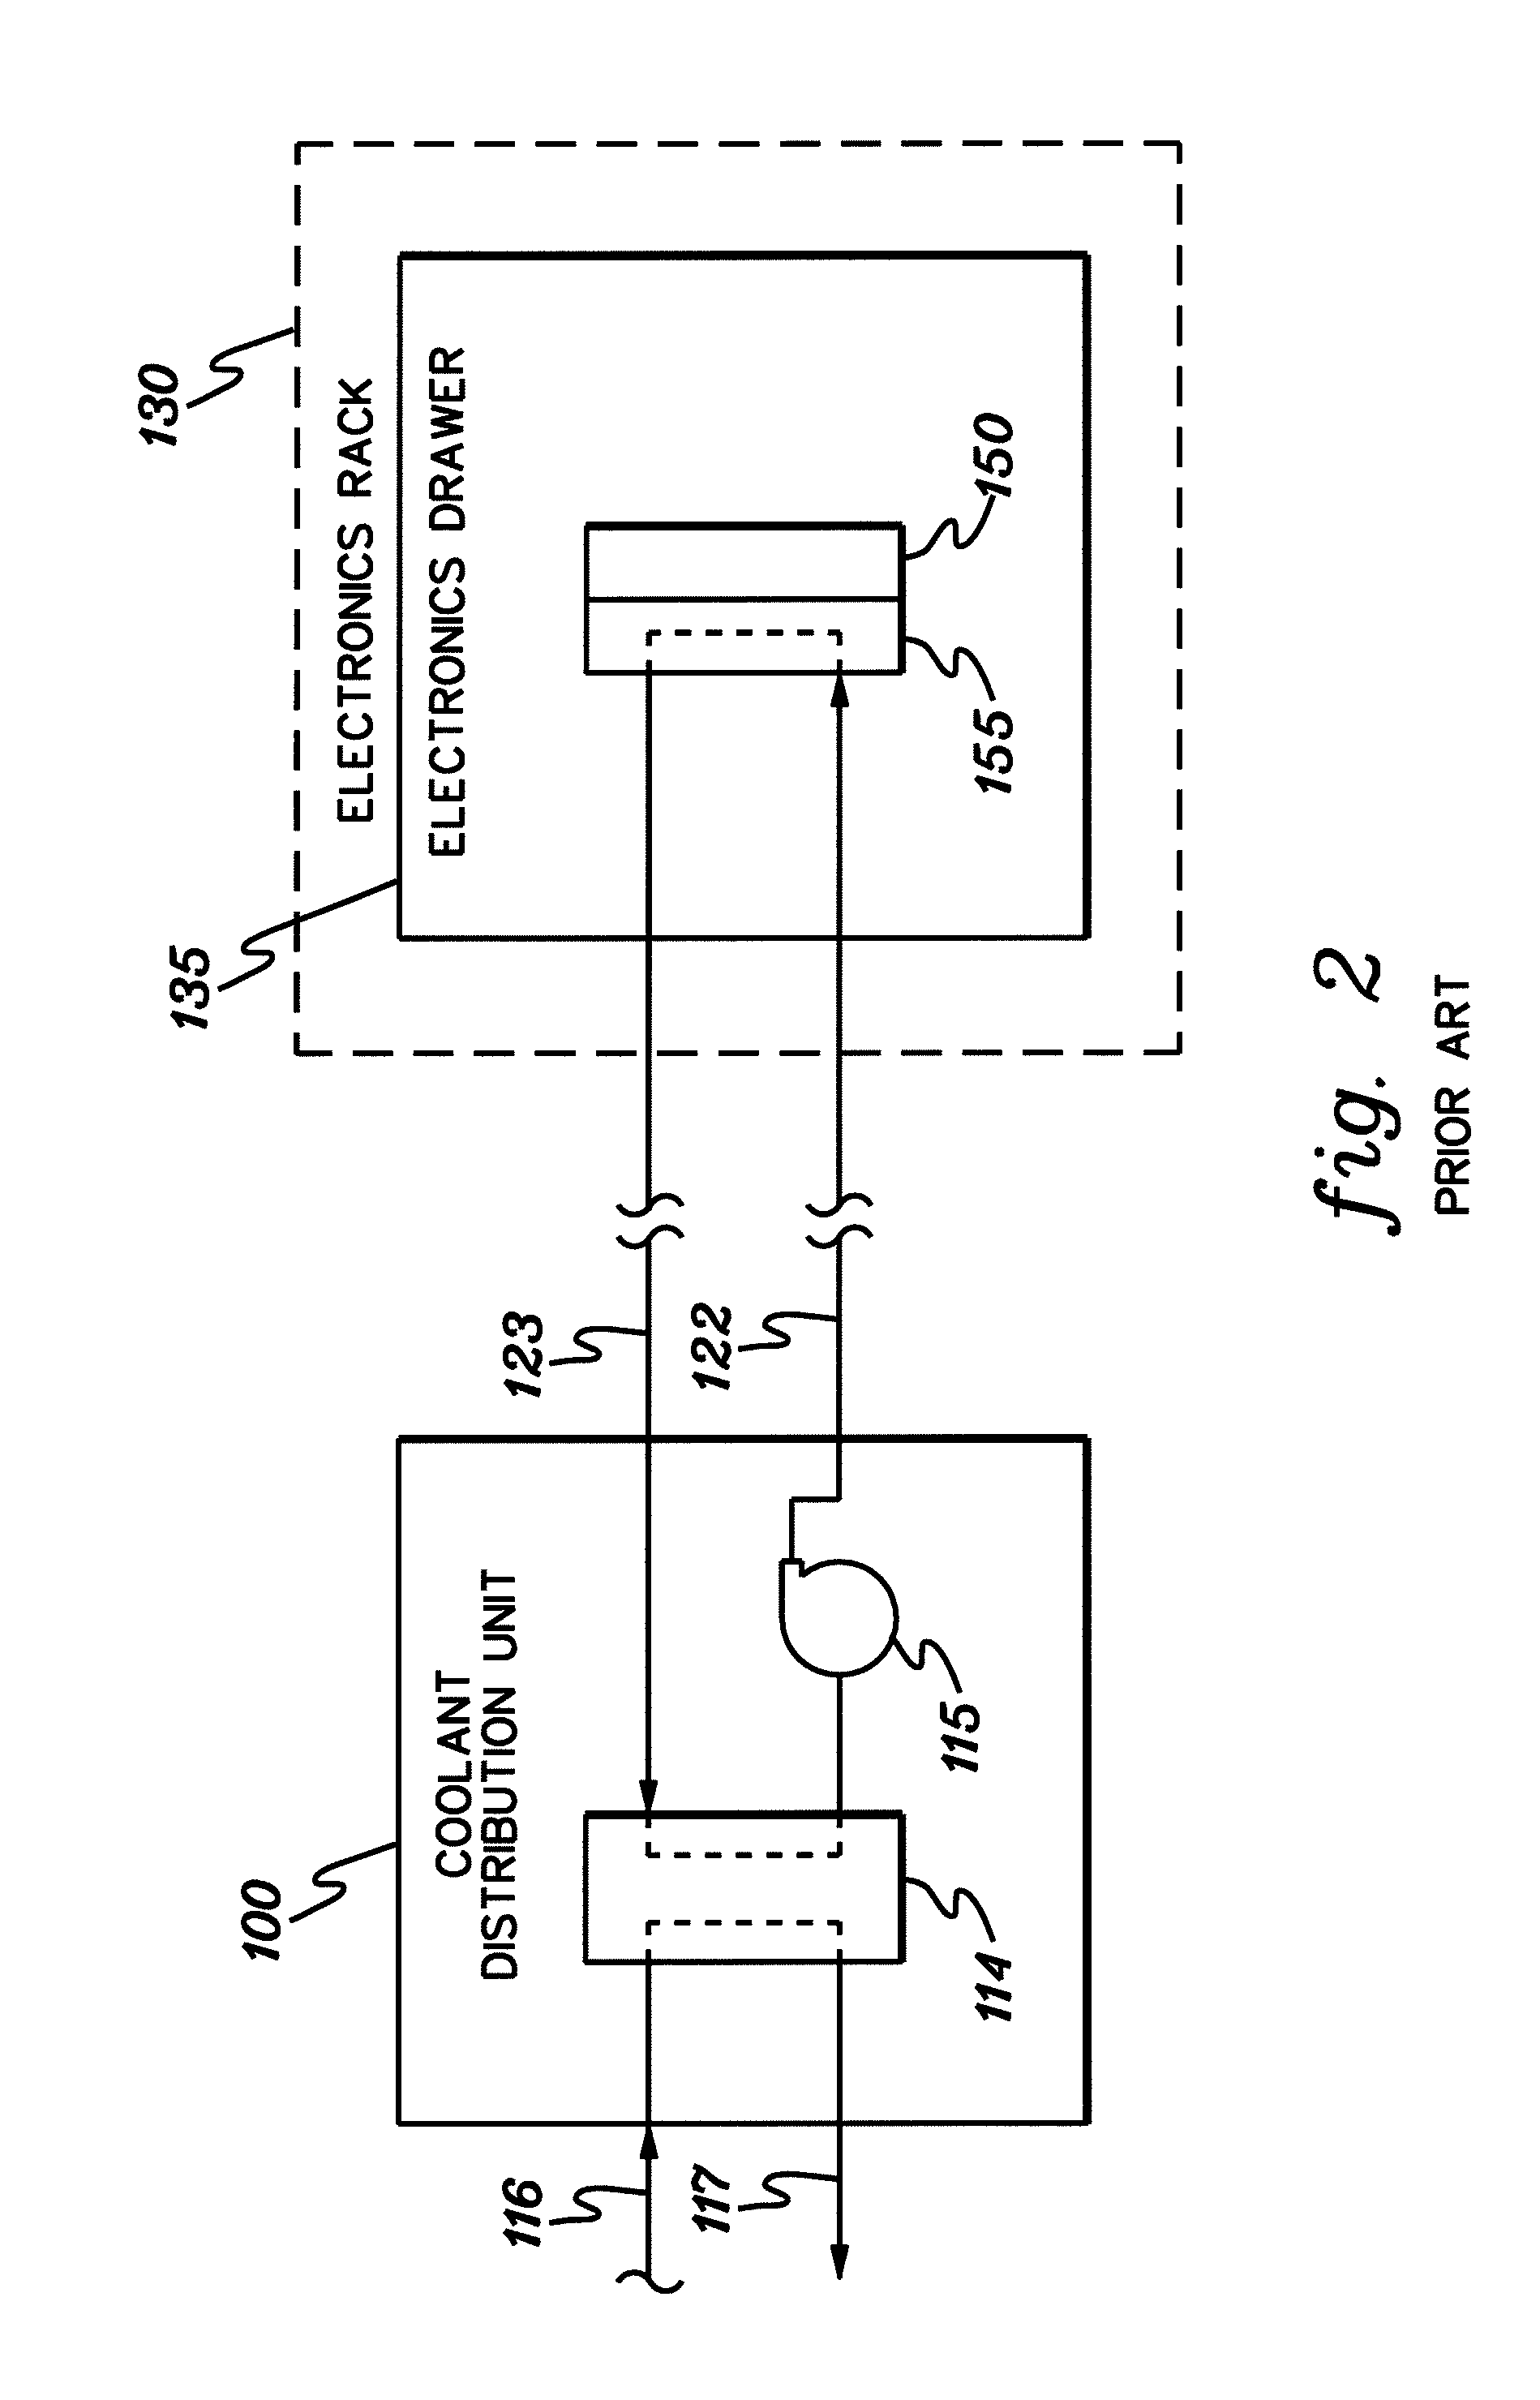 Cooling apparatuses and methods employing discrete cold plates compliantly coupled between a common manifold and electronics components of an assembly to be cooled